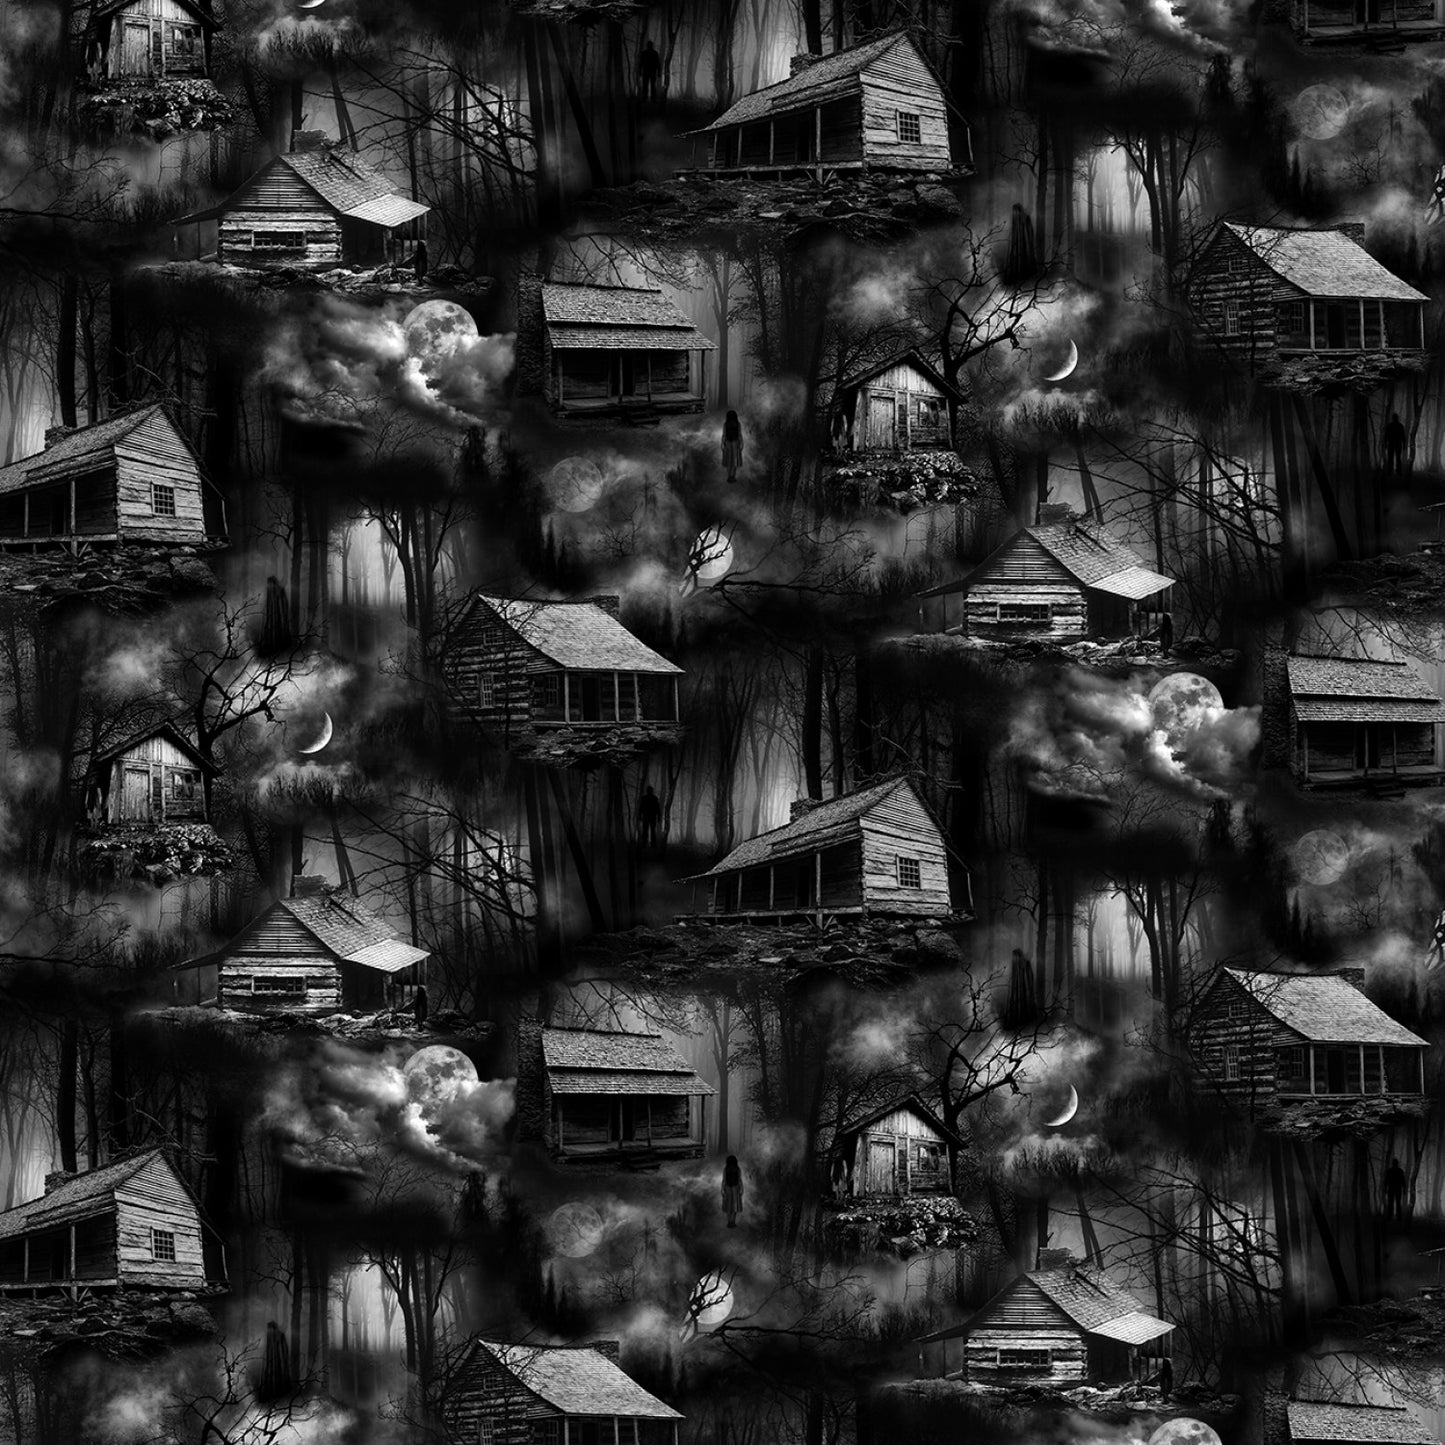 New Arrival: Wicked Spooky Cabins In The Wood Smoke    CD2761-SMOKE Cotton Woven Fabric